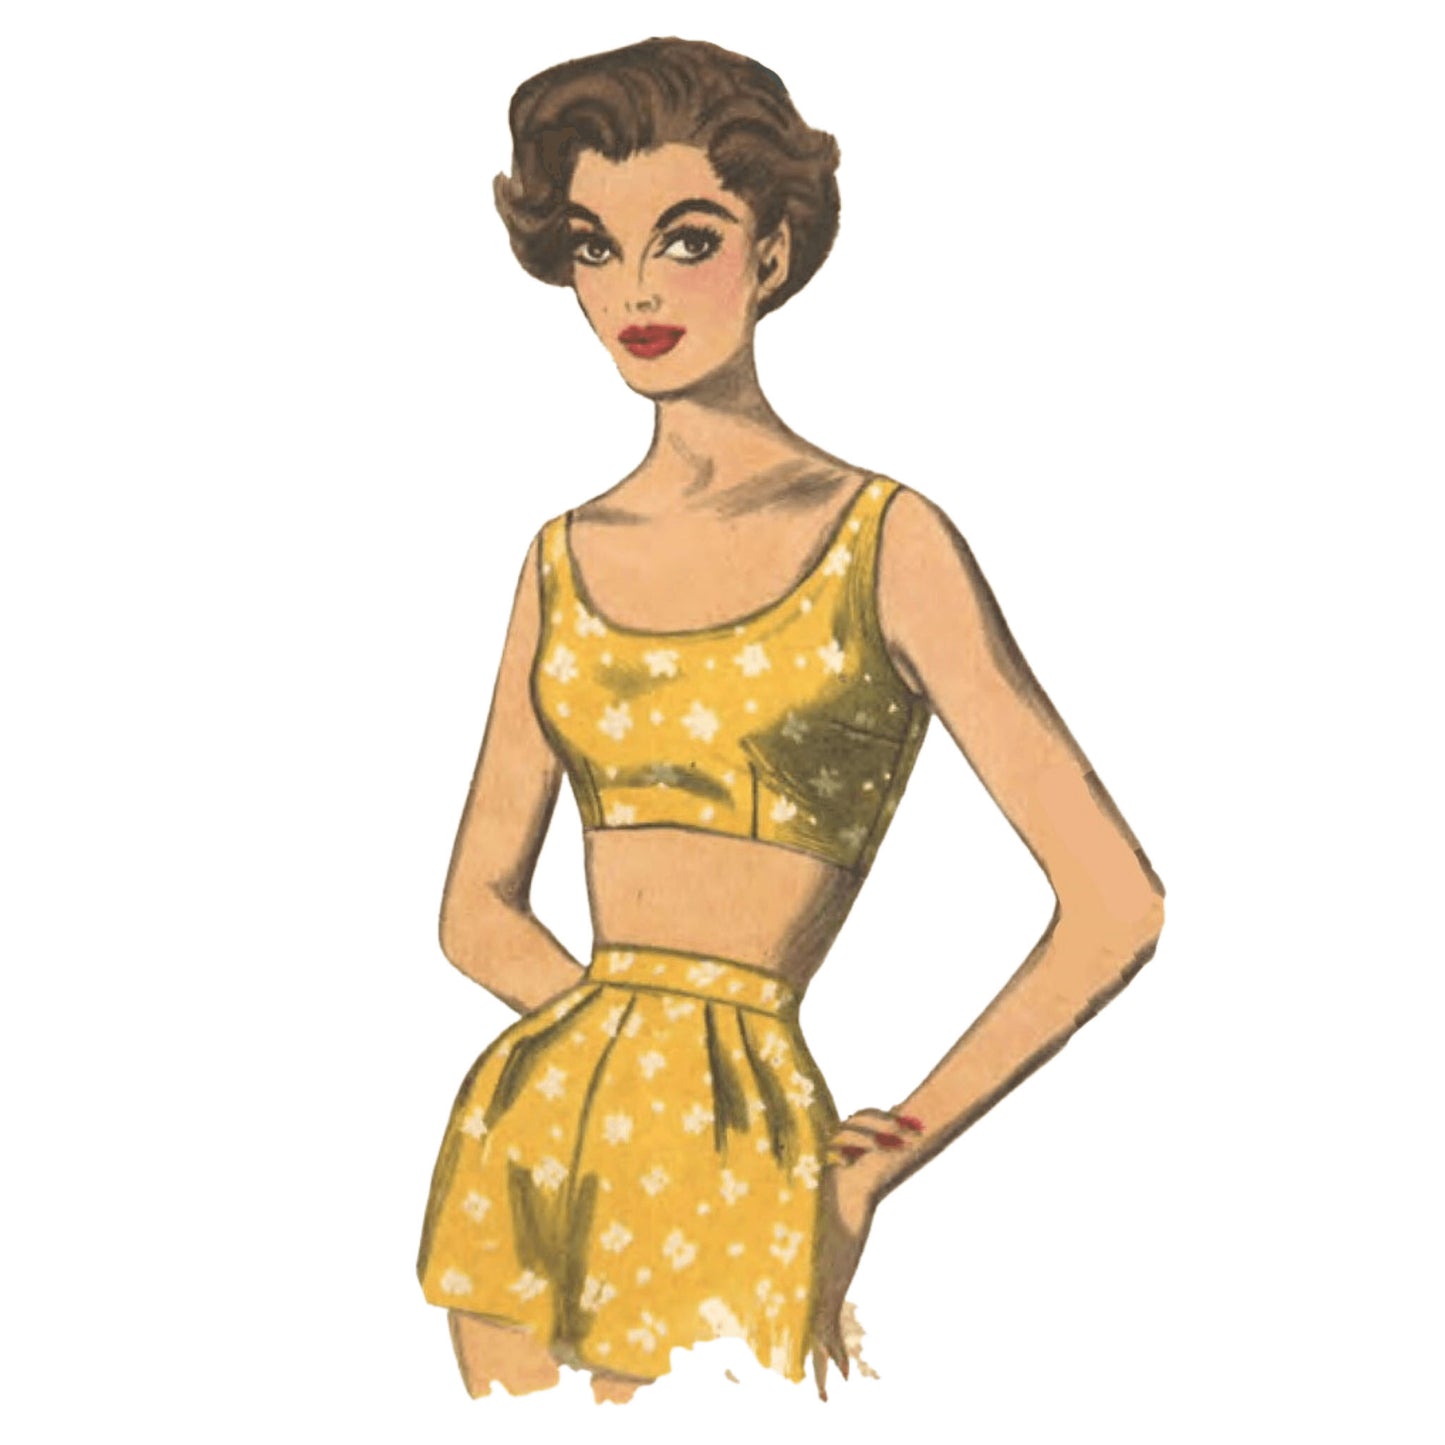 PDF - Vintage 1950s Pattern, Set of Blouse & Bra Crop Tops - Multi sizes - Instantly Print at Home - Vintage Sewing Pattern Company